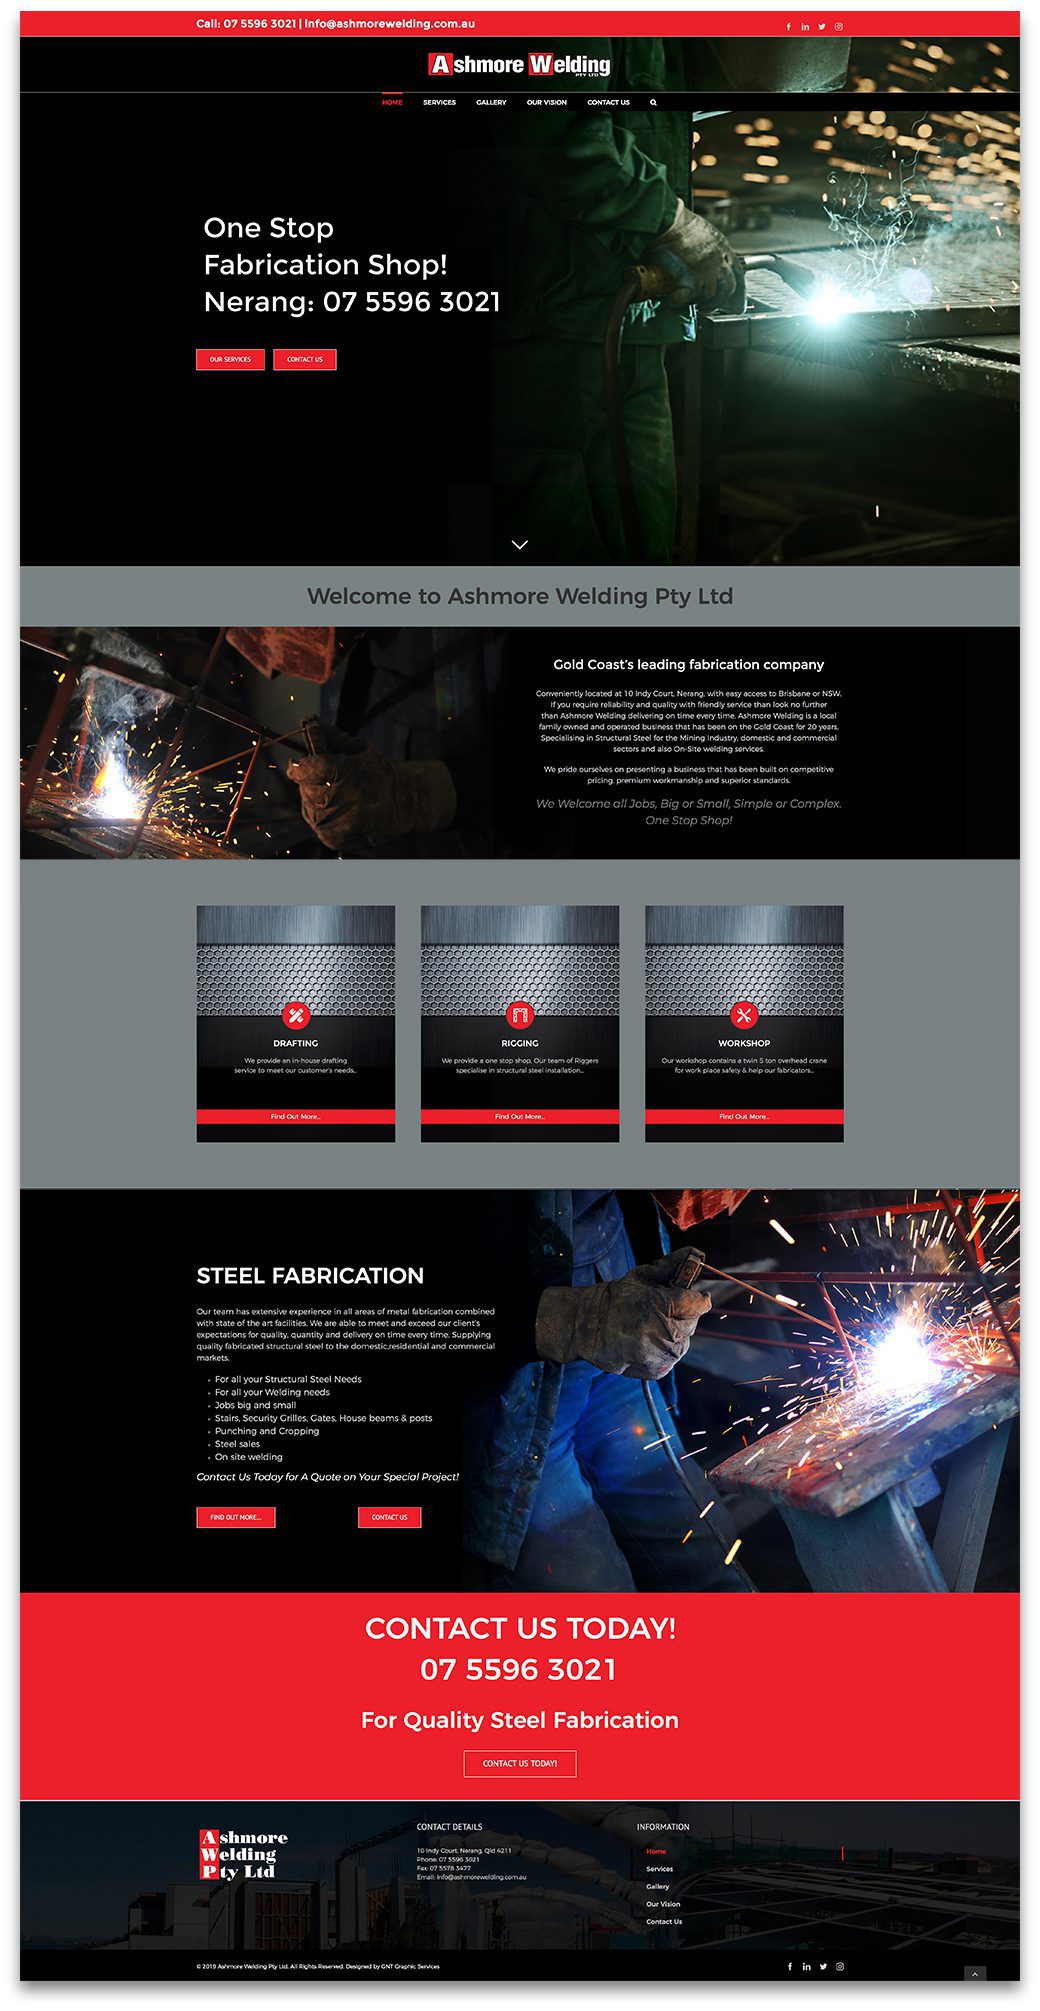 Ashmore Welding Website deigned & built by GNT Graphic Services